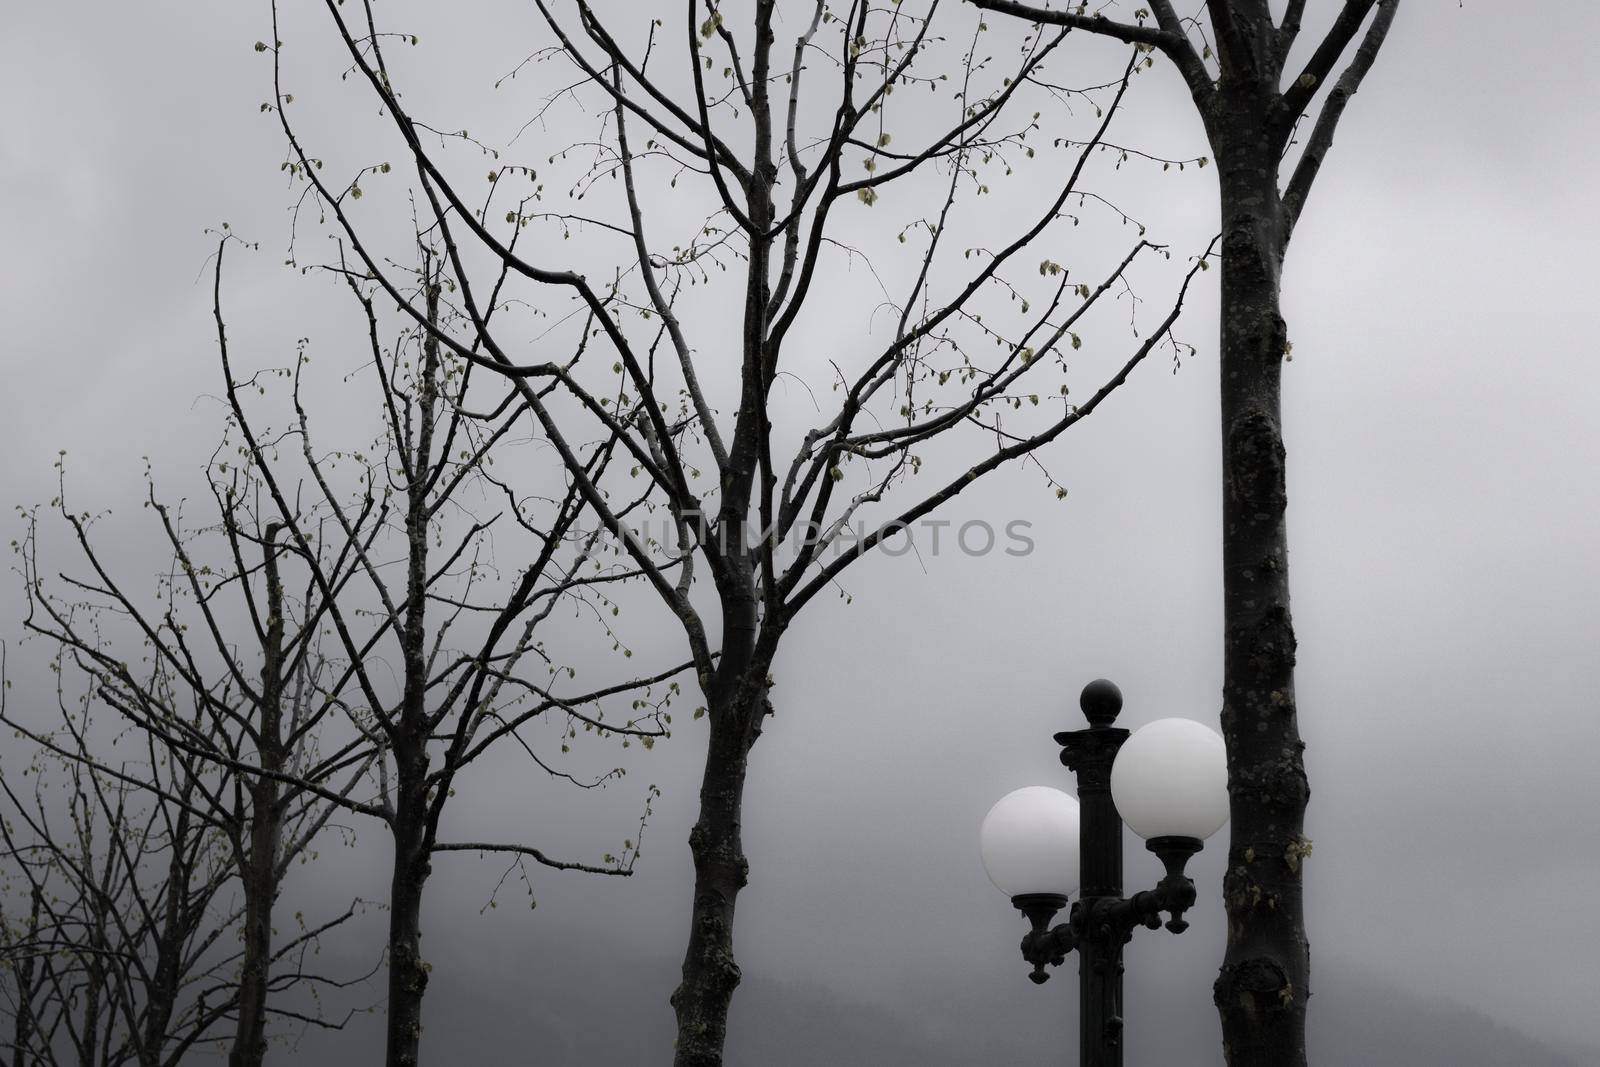 Street lamp aligned with some trees in winter in black and white